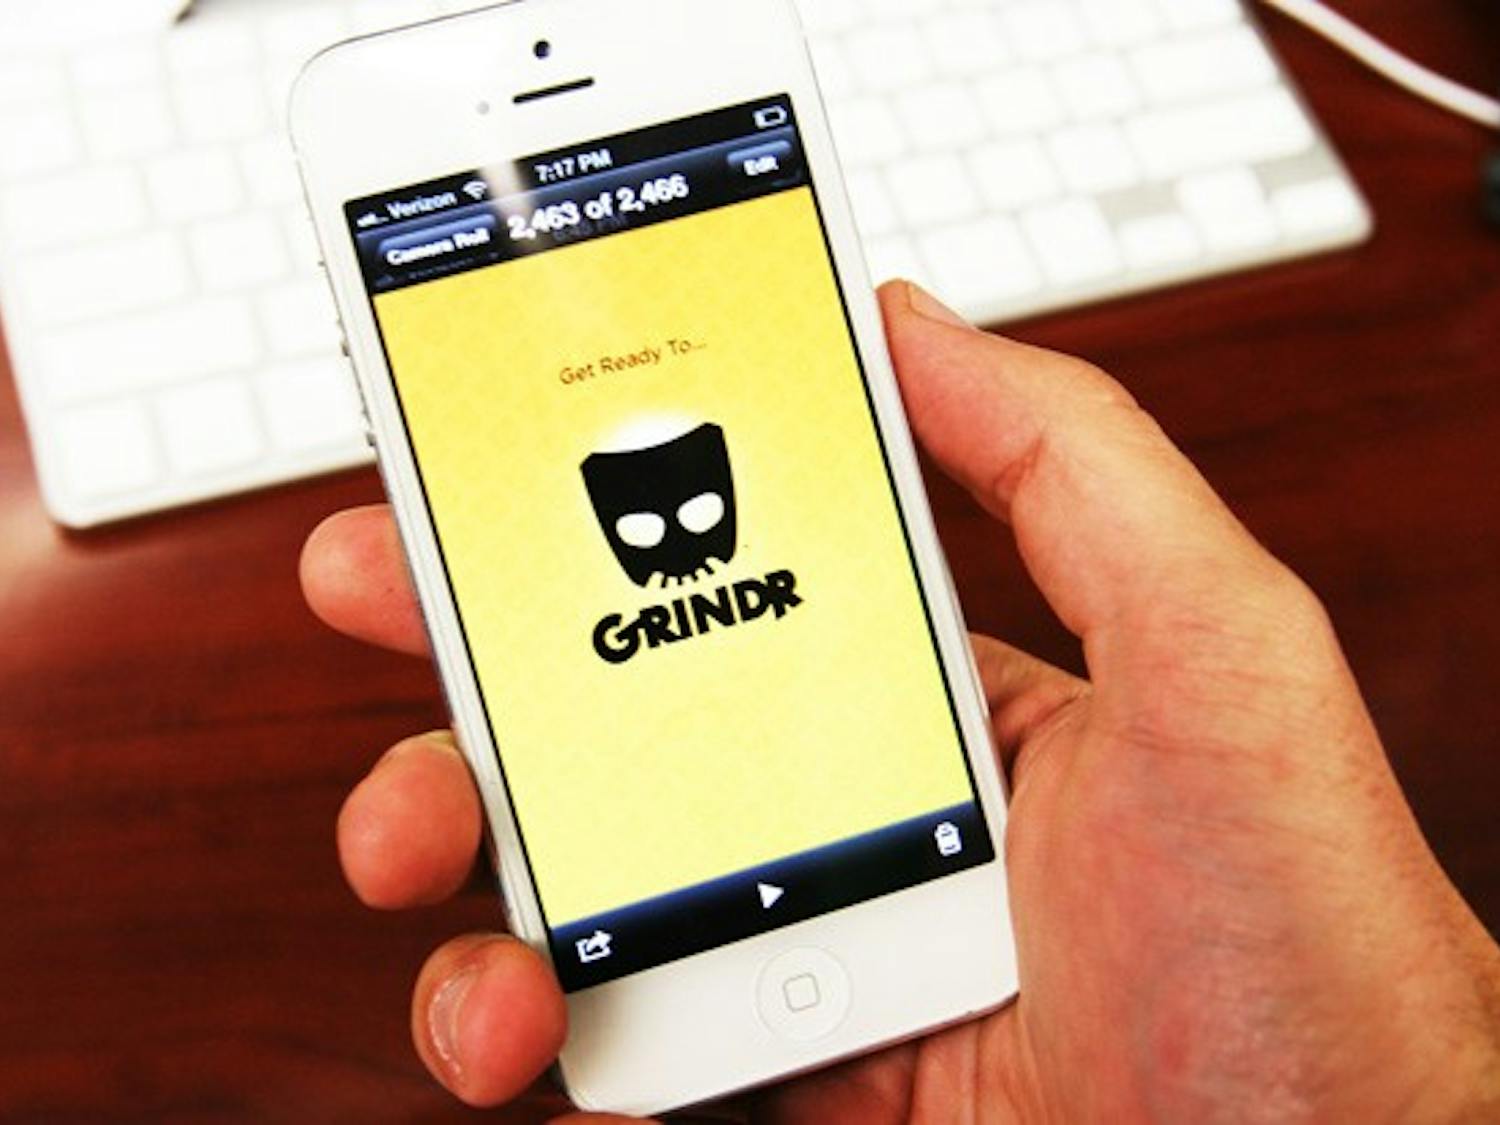 Some students at Duke who are frustrated with the on-campus dating scene might use online dating service, like Grindr.